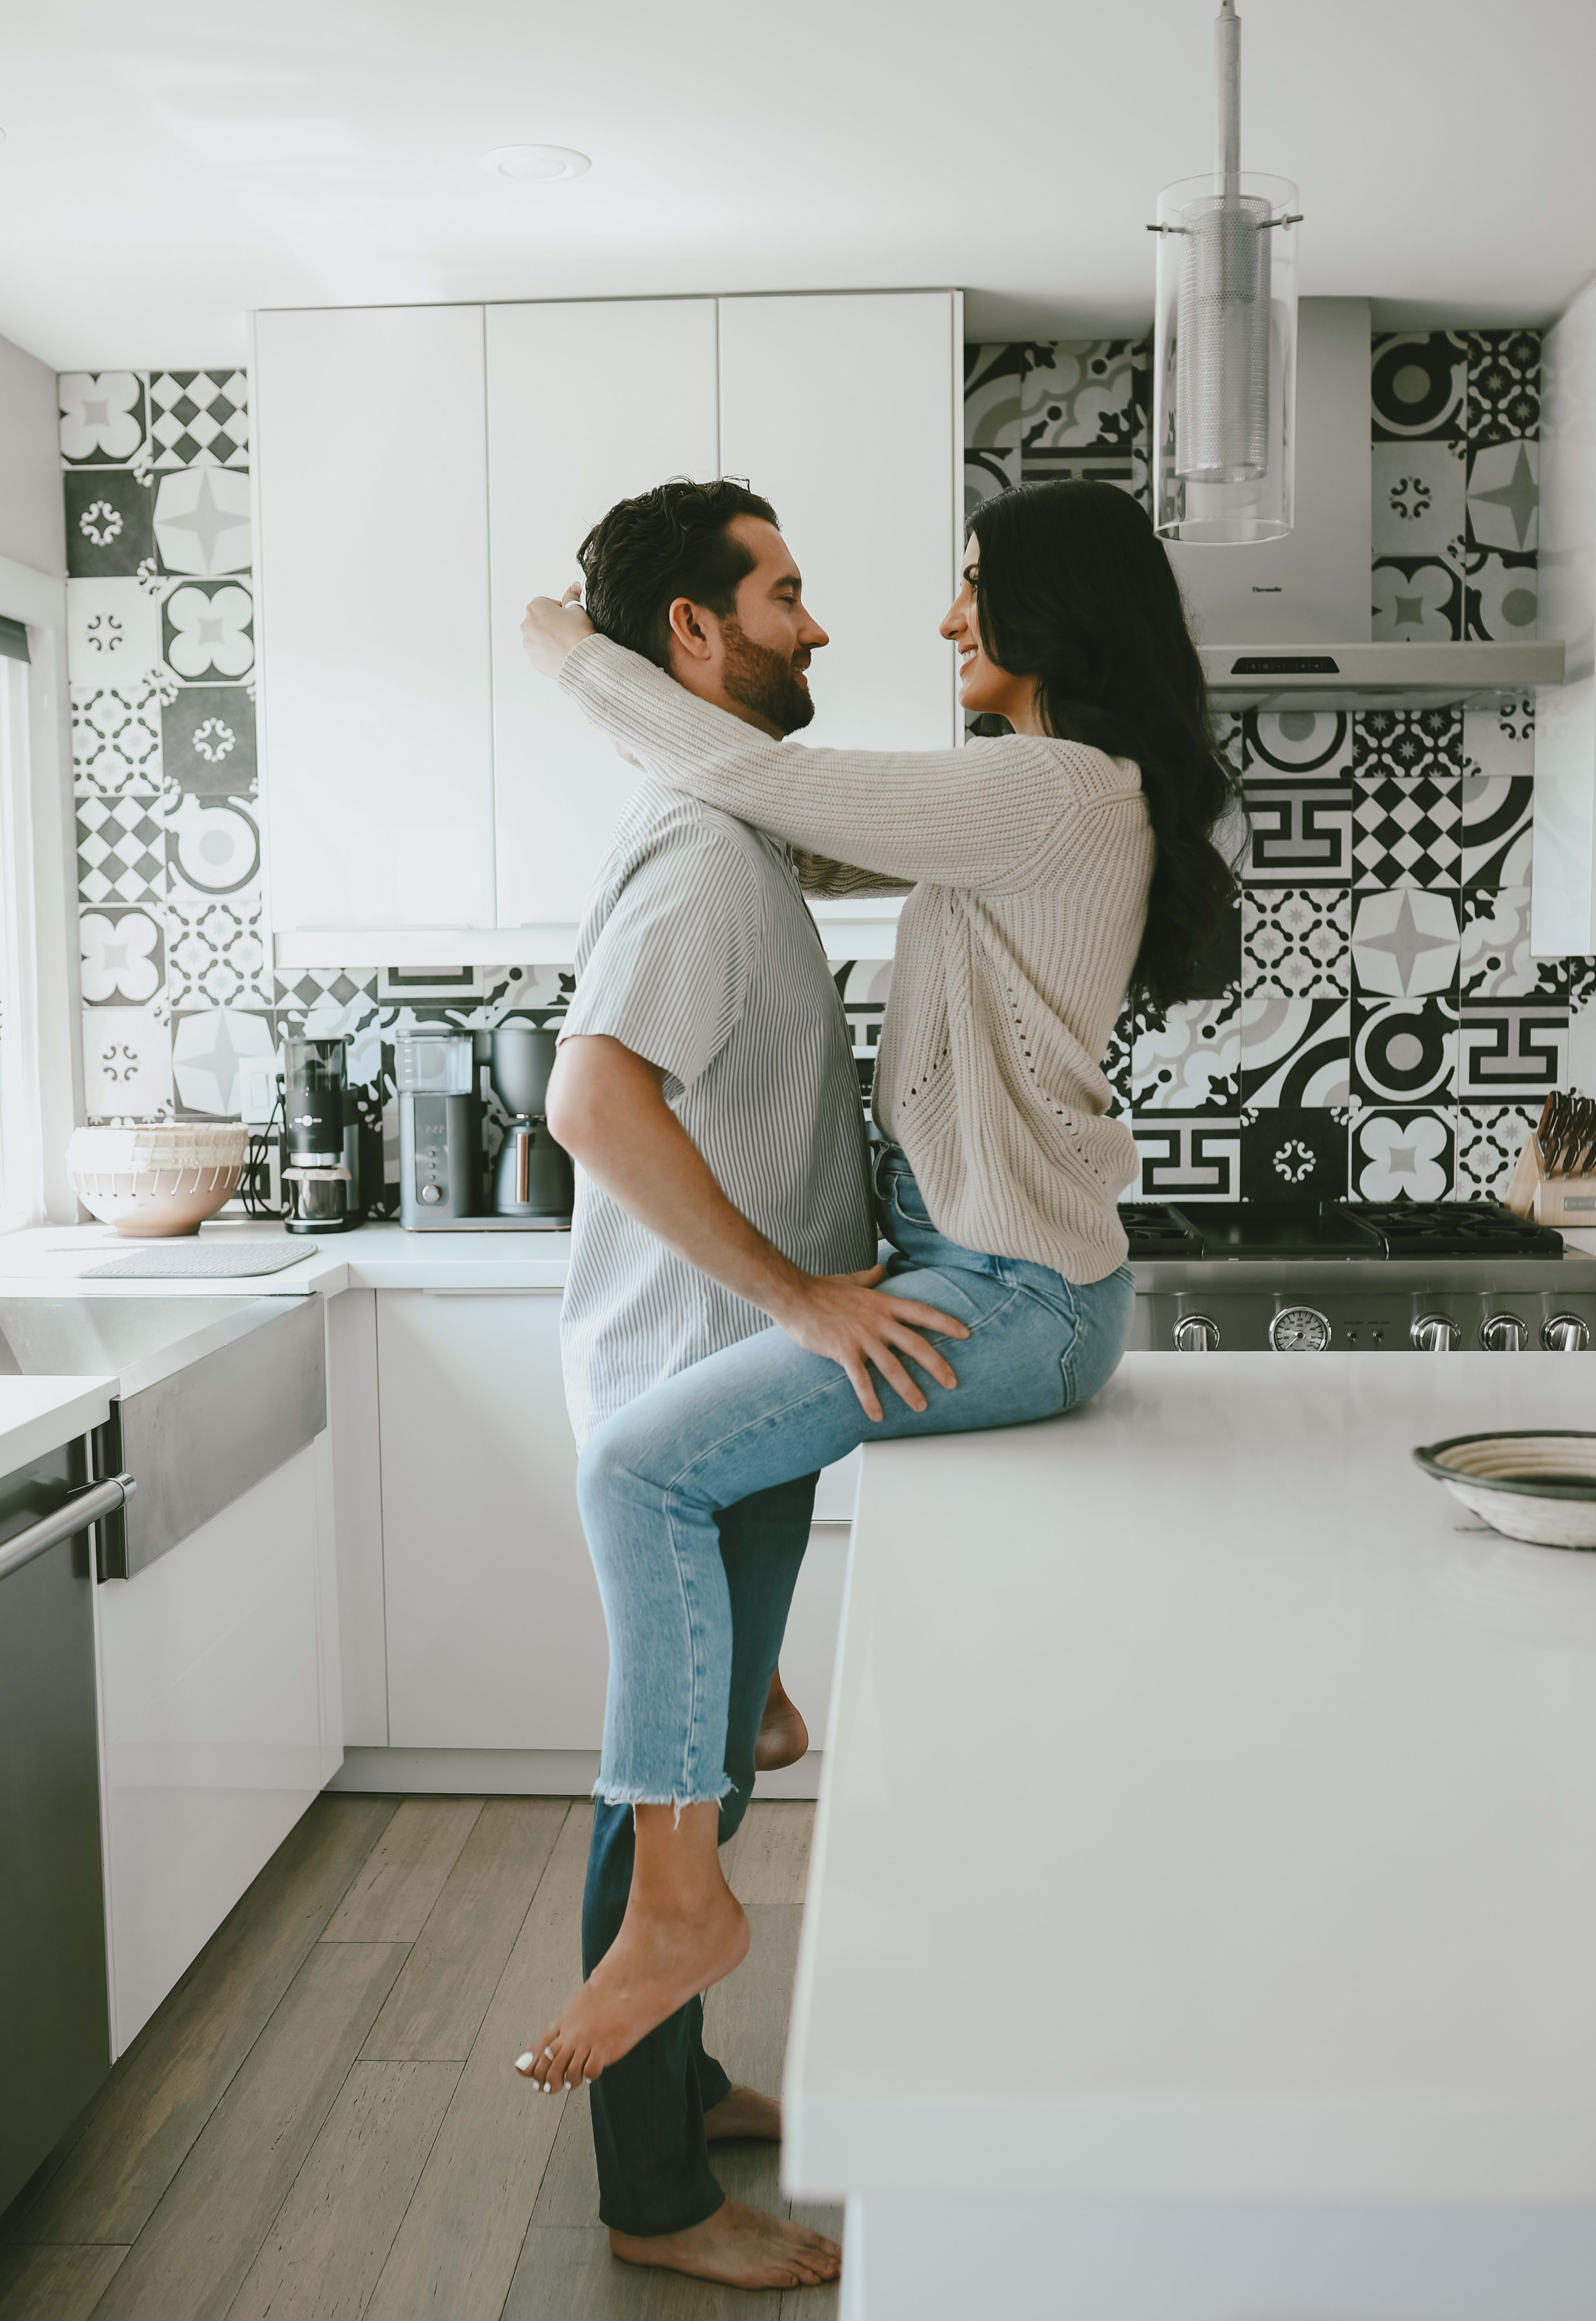 A couple poses for a photoshoot in their white kitchen, with grey accents adding subtle detail to the background.